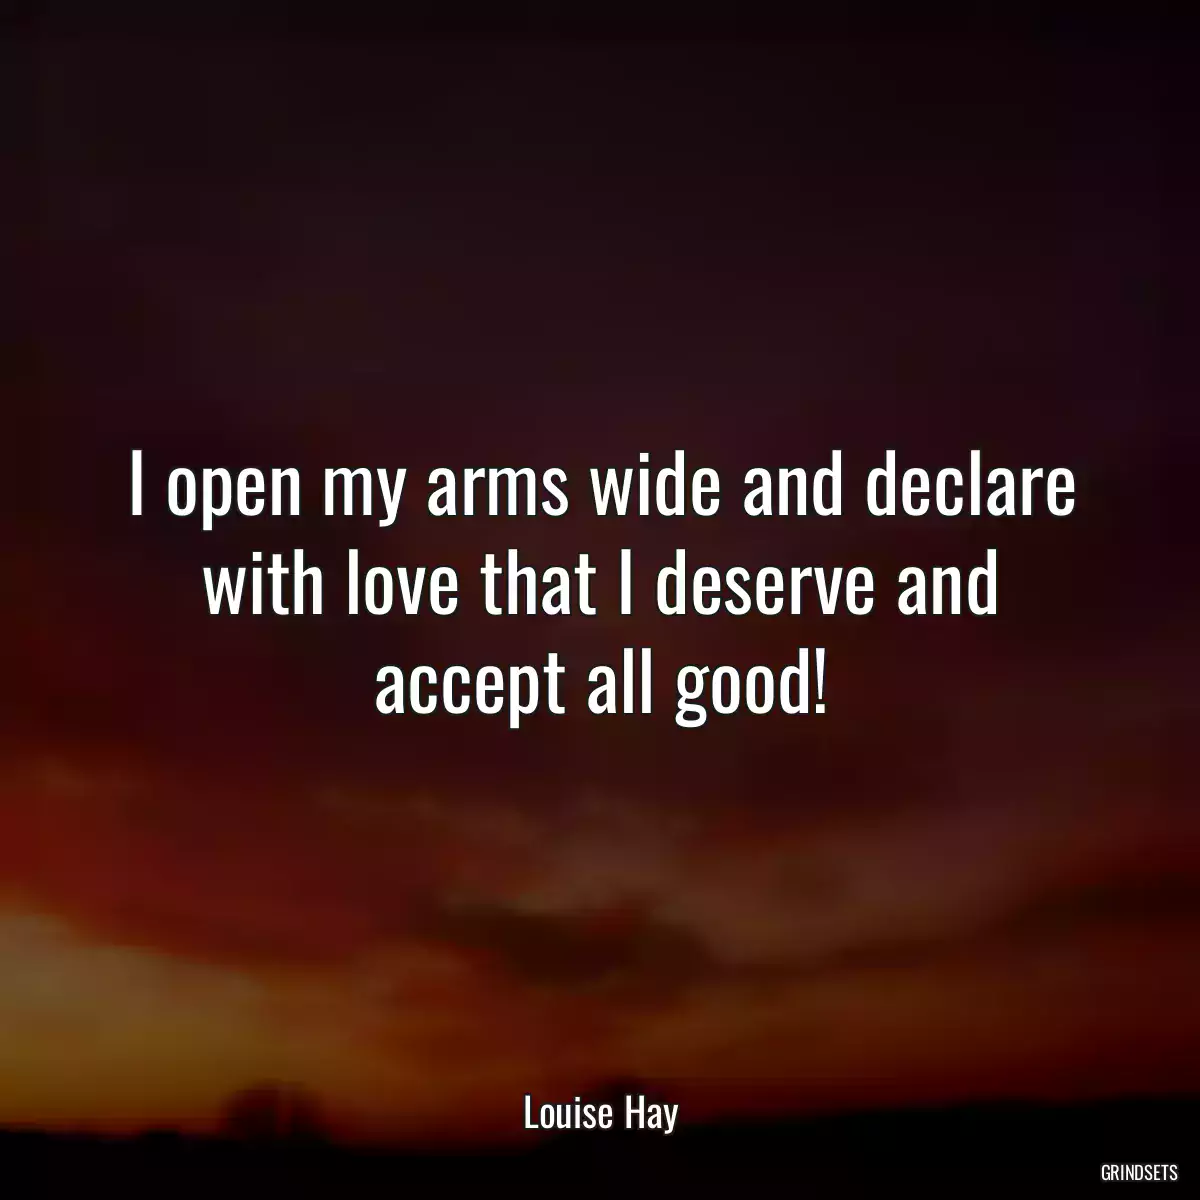 I open my arms wide and declare with love that I deserve and accept all good!